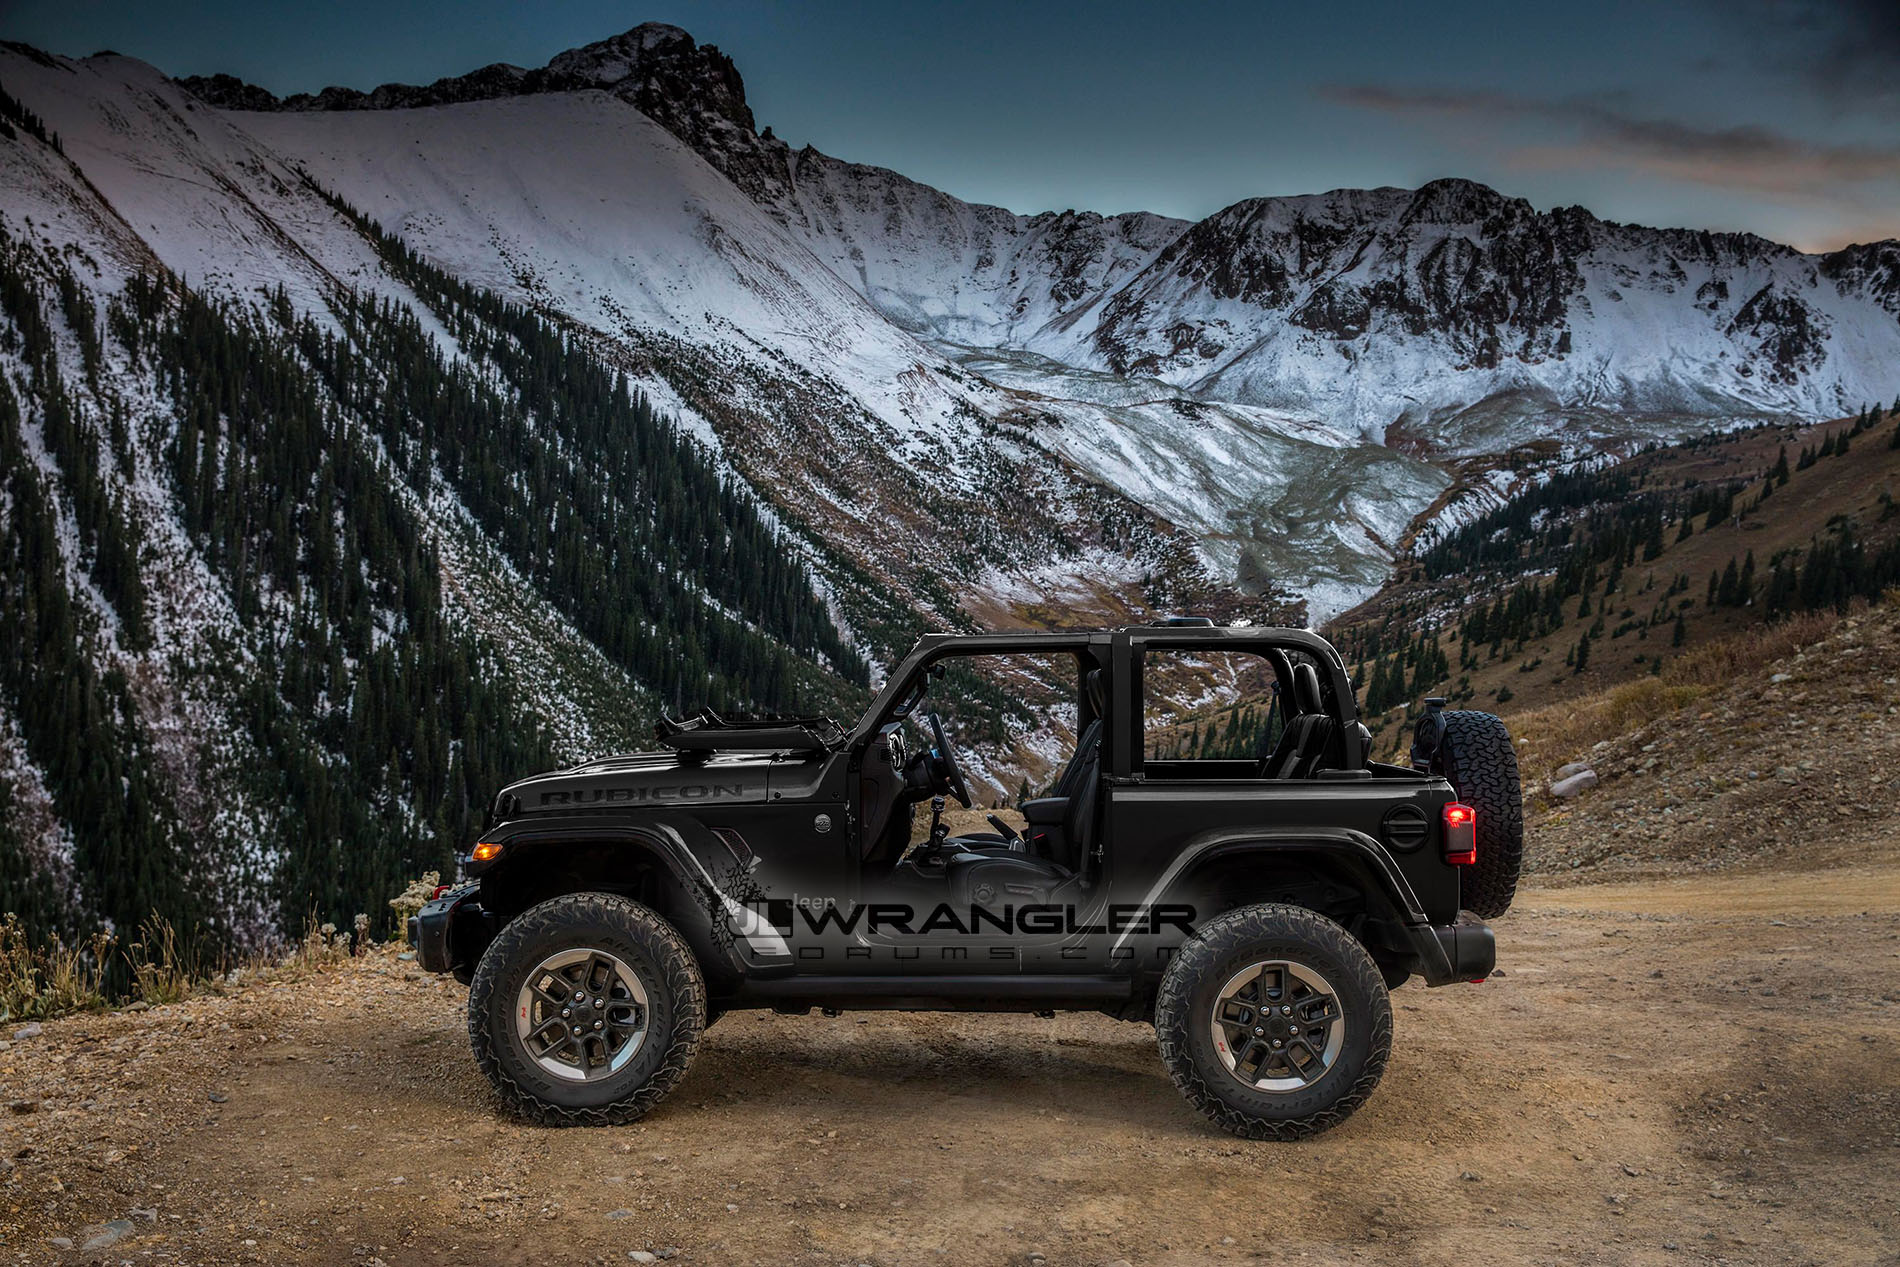 2018 Jeep Wrangler Leaked Color Options Include "Punk'n ...